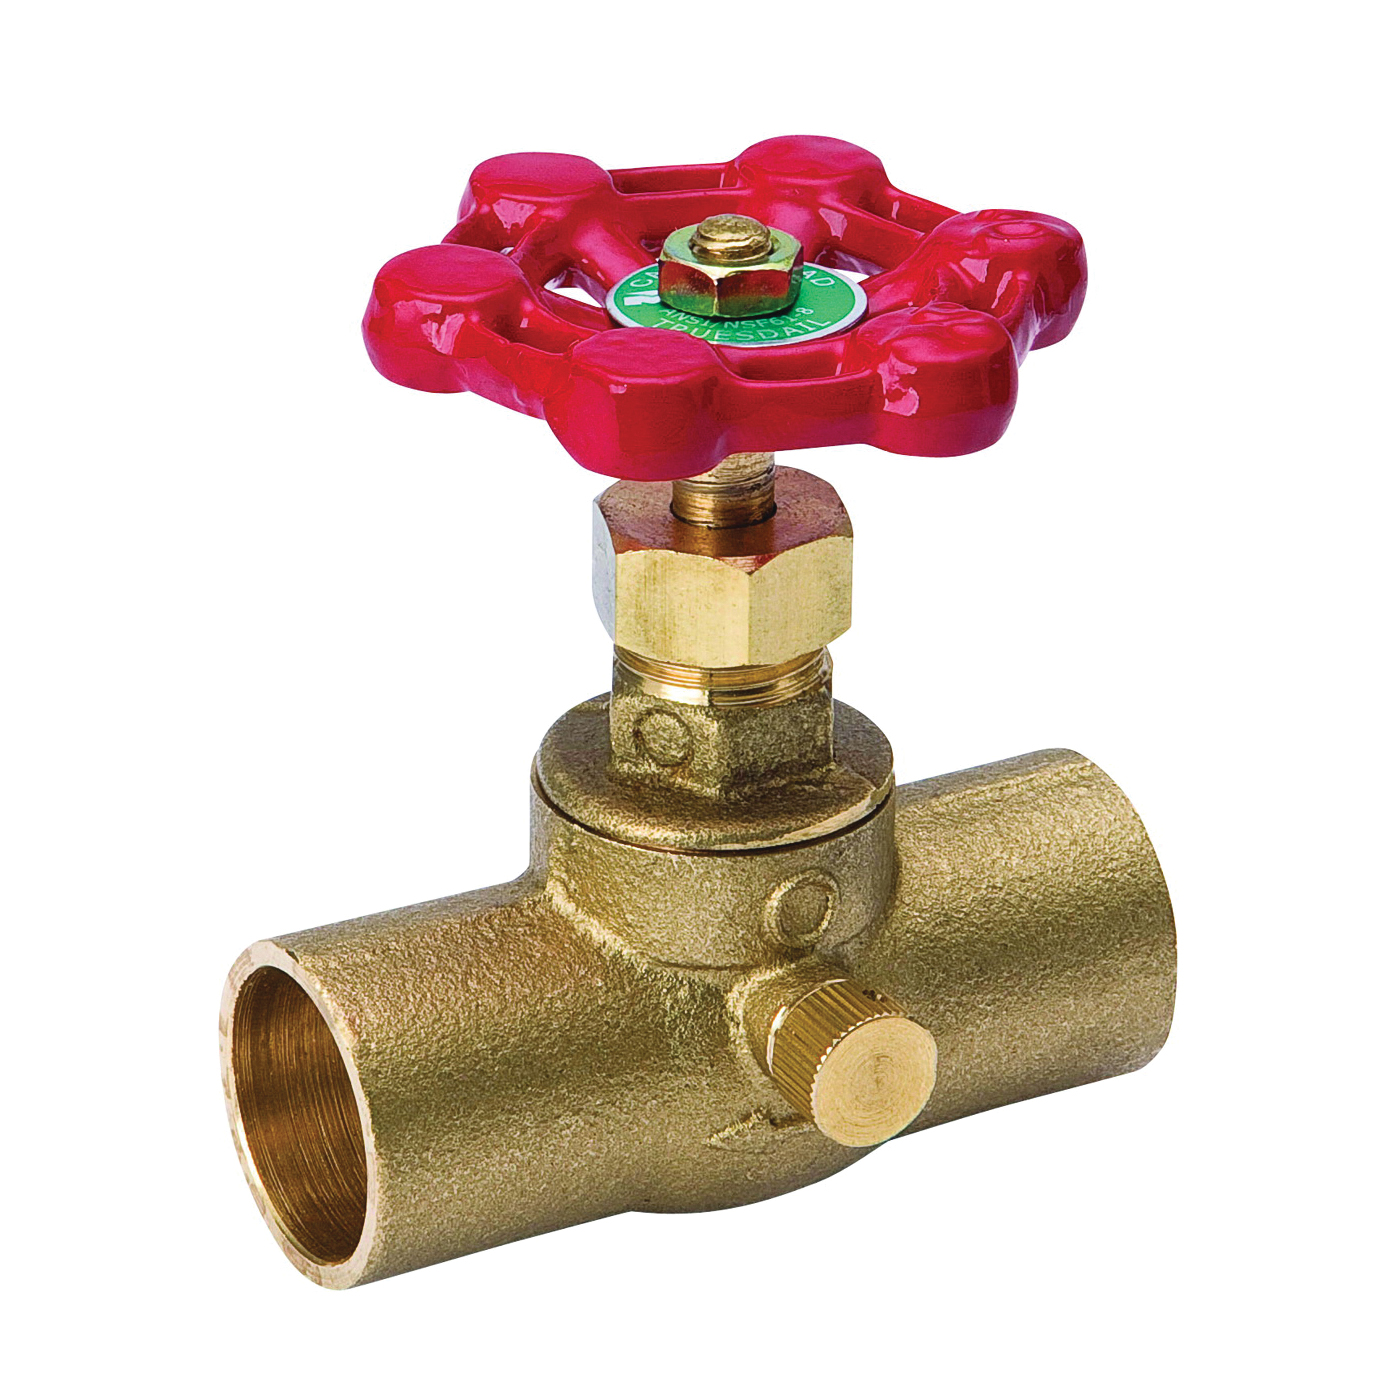 105-603NL Stop and Waste Valve, 1/2 in Connection, Compression, 125 psi Pressure, Brass Body